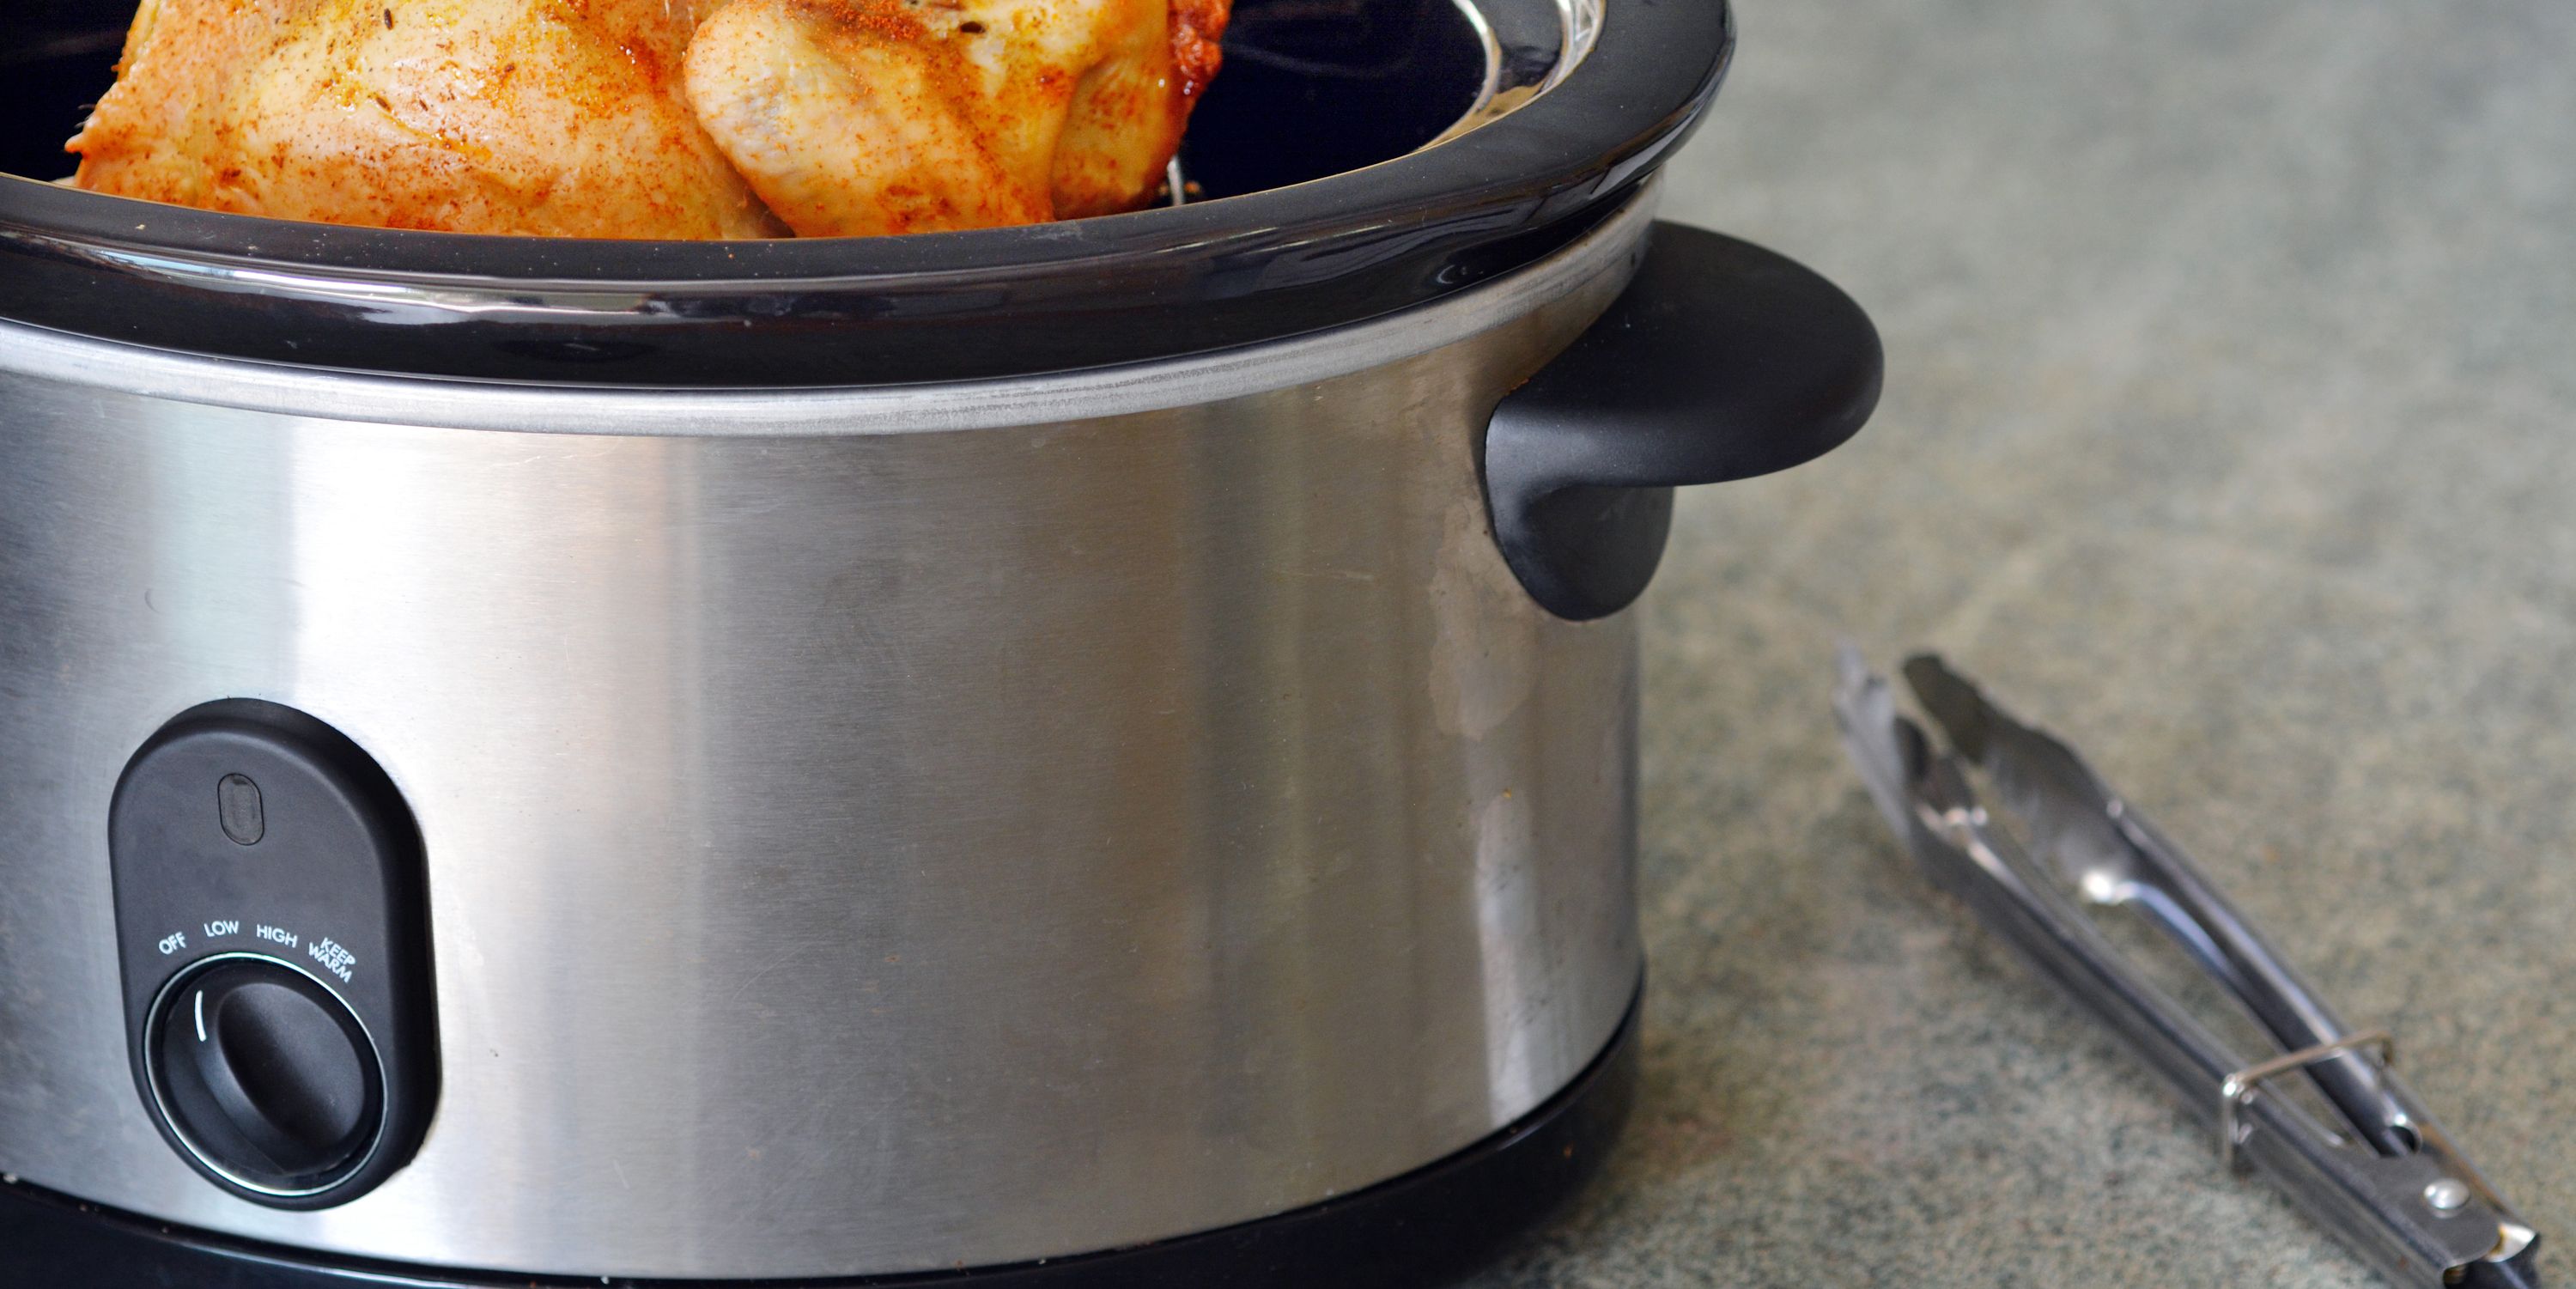 Slow Cooker Fire Safety Tips That Will Help You Rest Easy